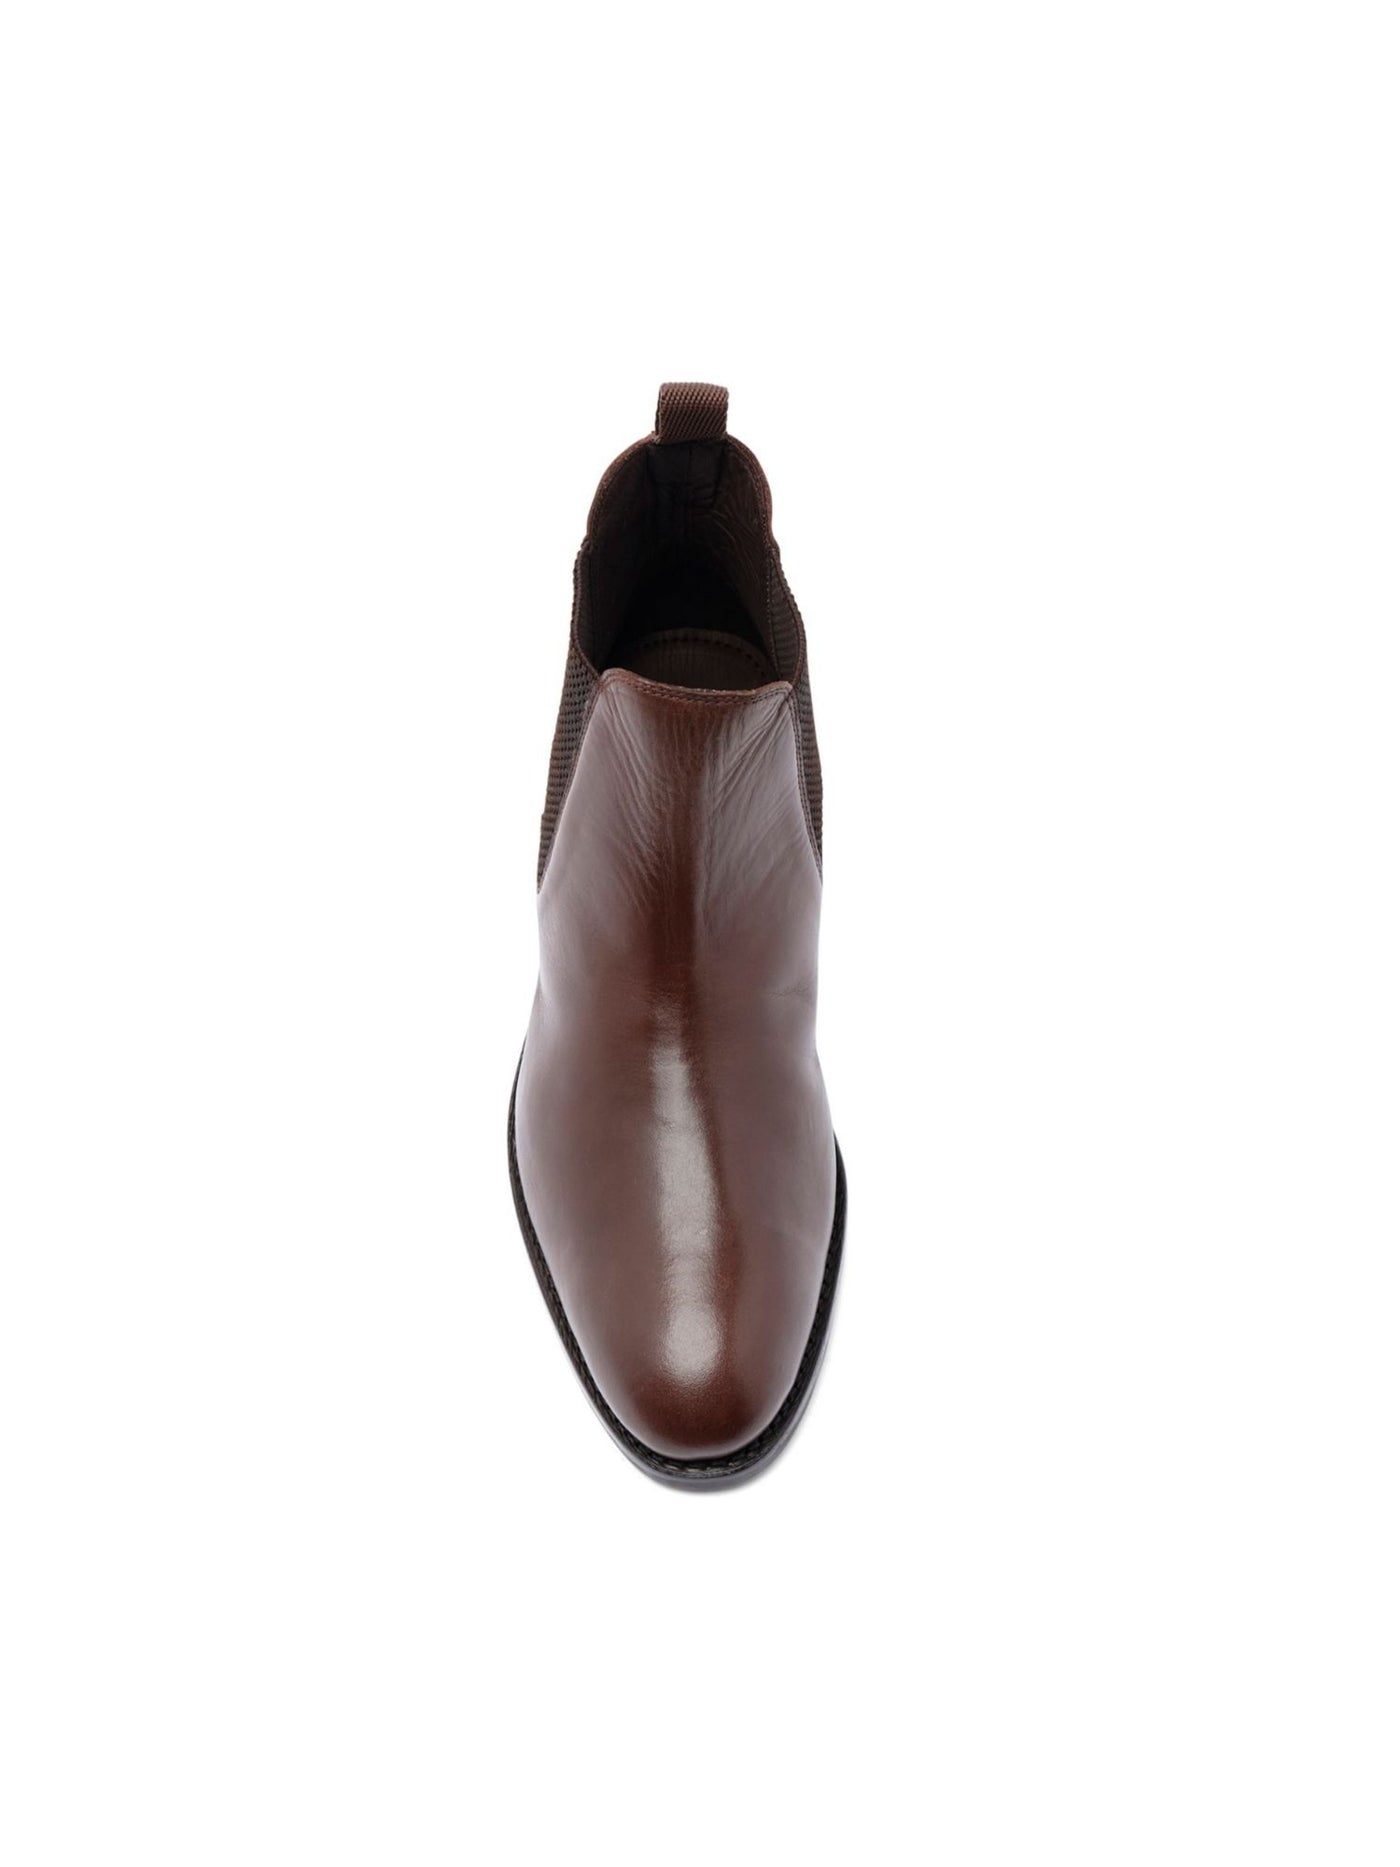 ANTHONY VEER ESSENTIALS Mens Brown Goring Jefferson Round Toe Slip On Leather Chelsea 8 D